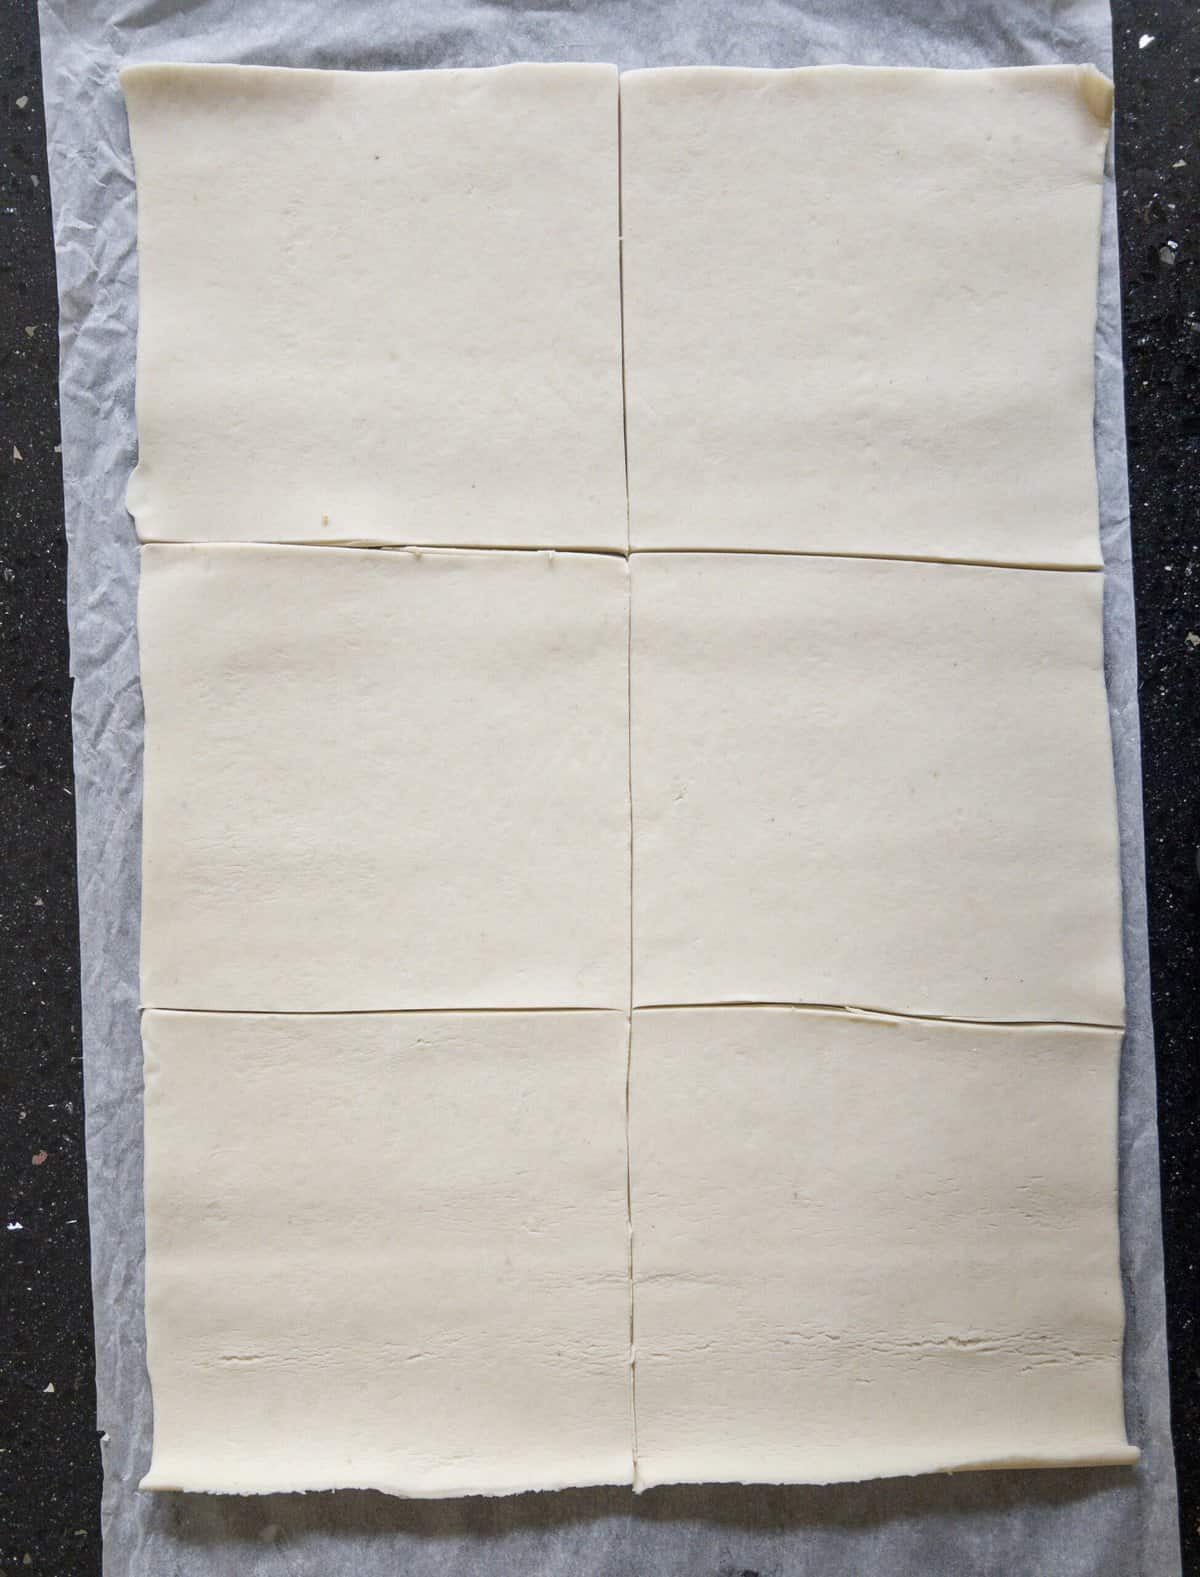 pastry sheet cut into 6 squares